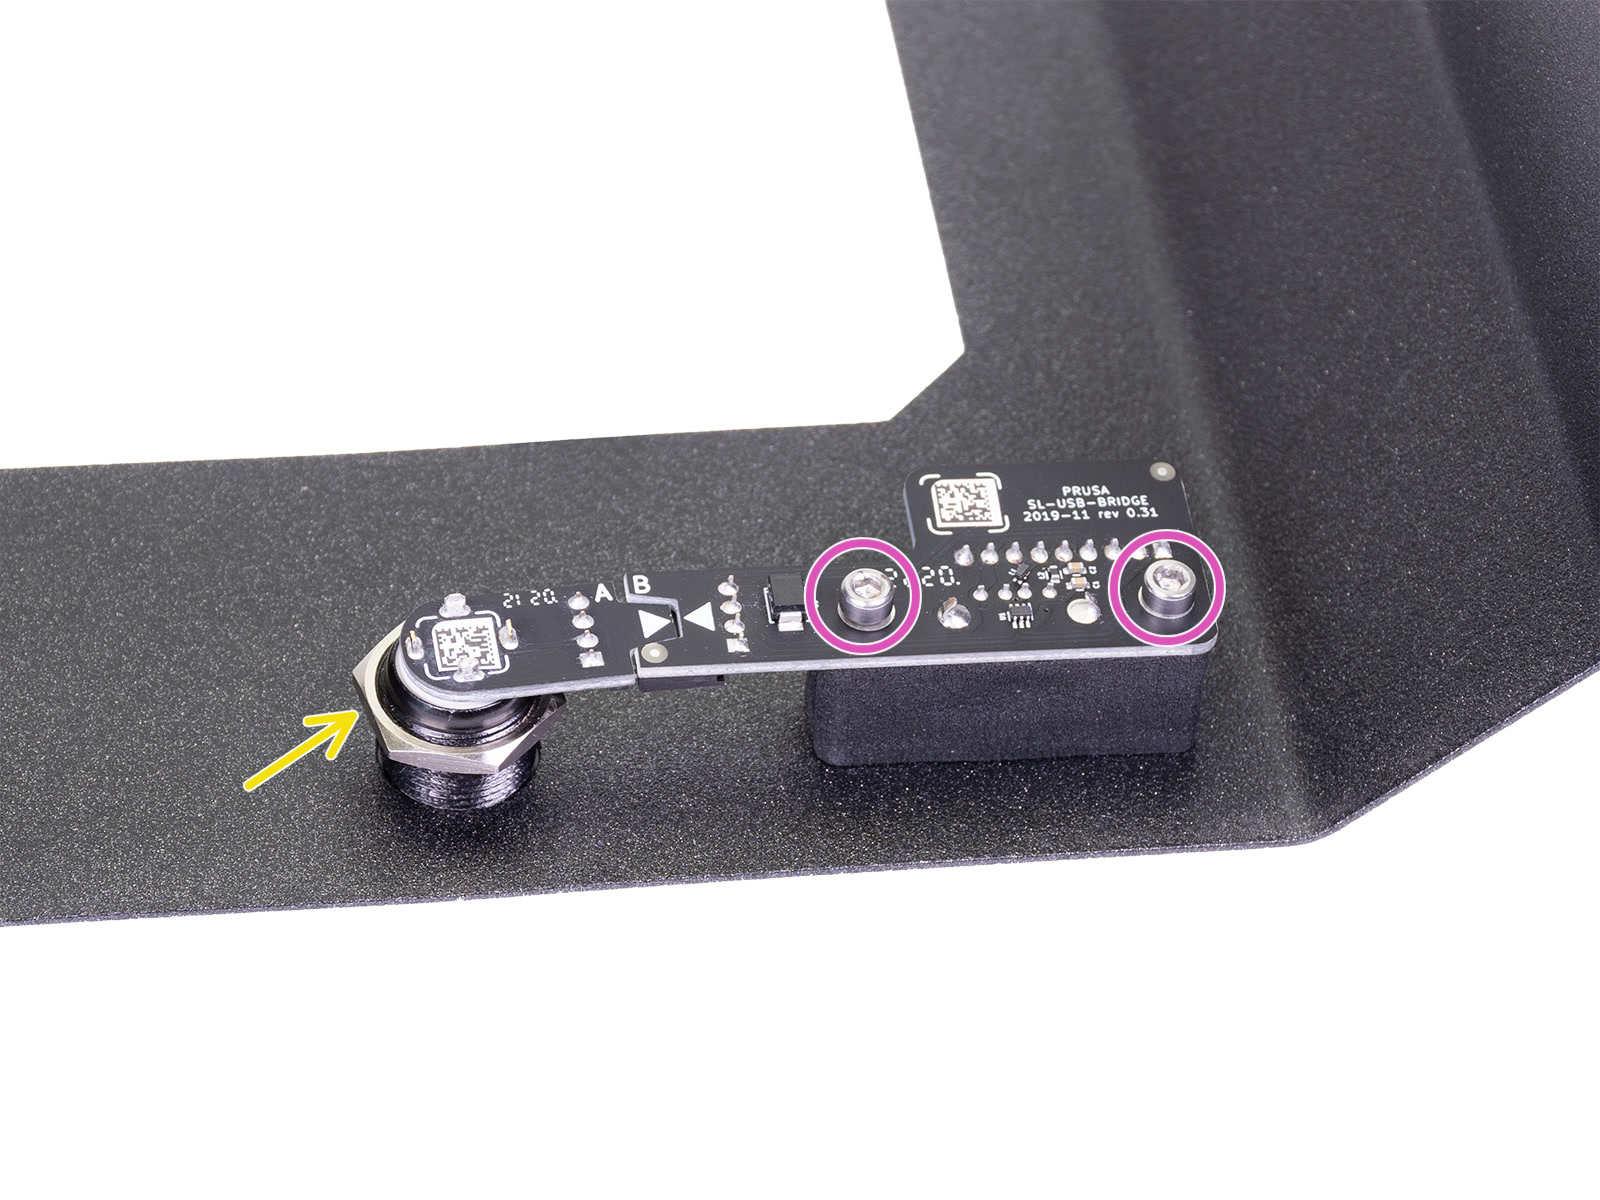 Removing the USB connector (Version 3.0)